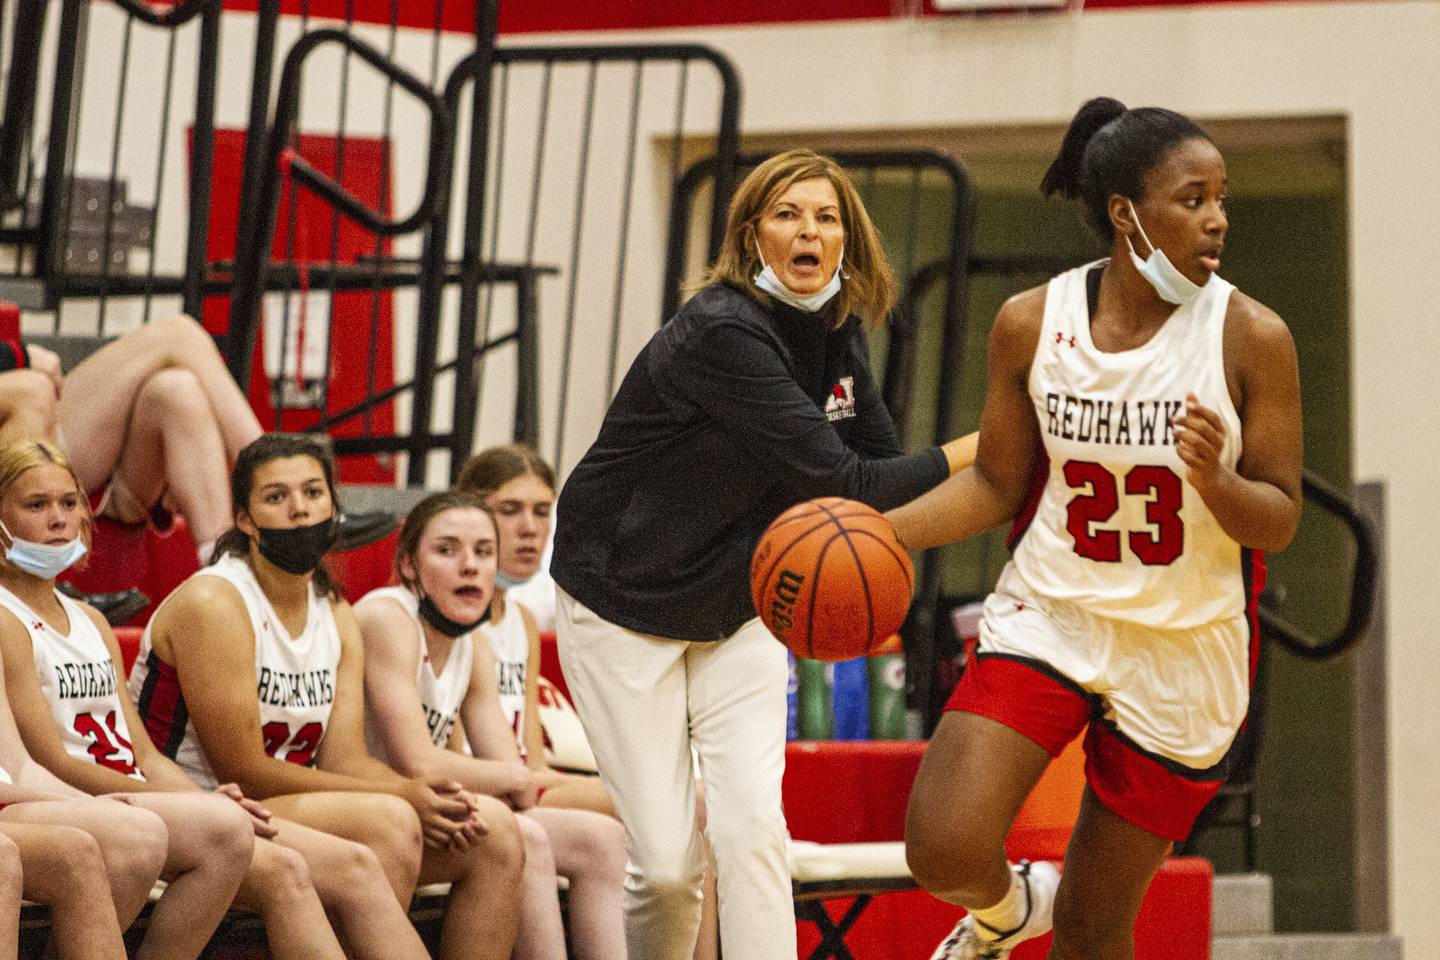 Marist's coach Mary Pat Connolly calls out a play as Le'lani Harris brings the ball up court during a game against Simeon on Monday, Nov. 22, 2021.